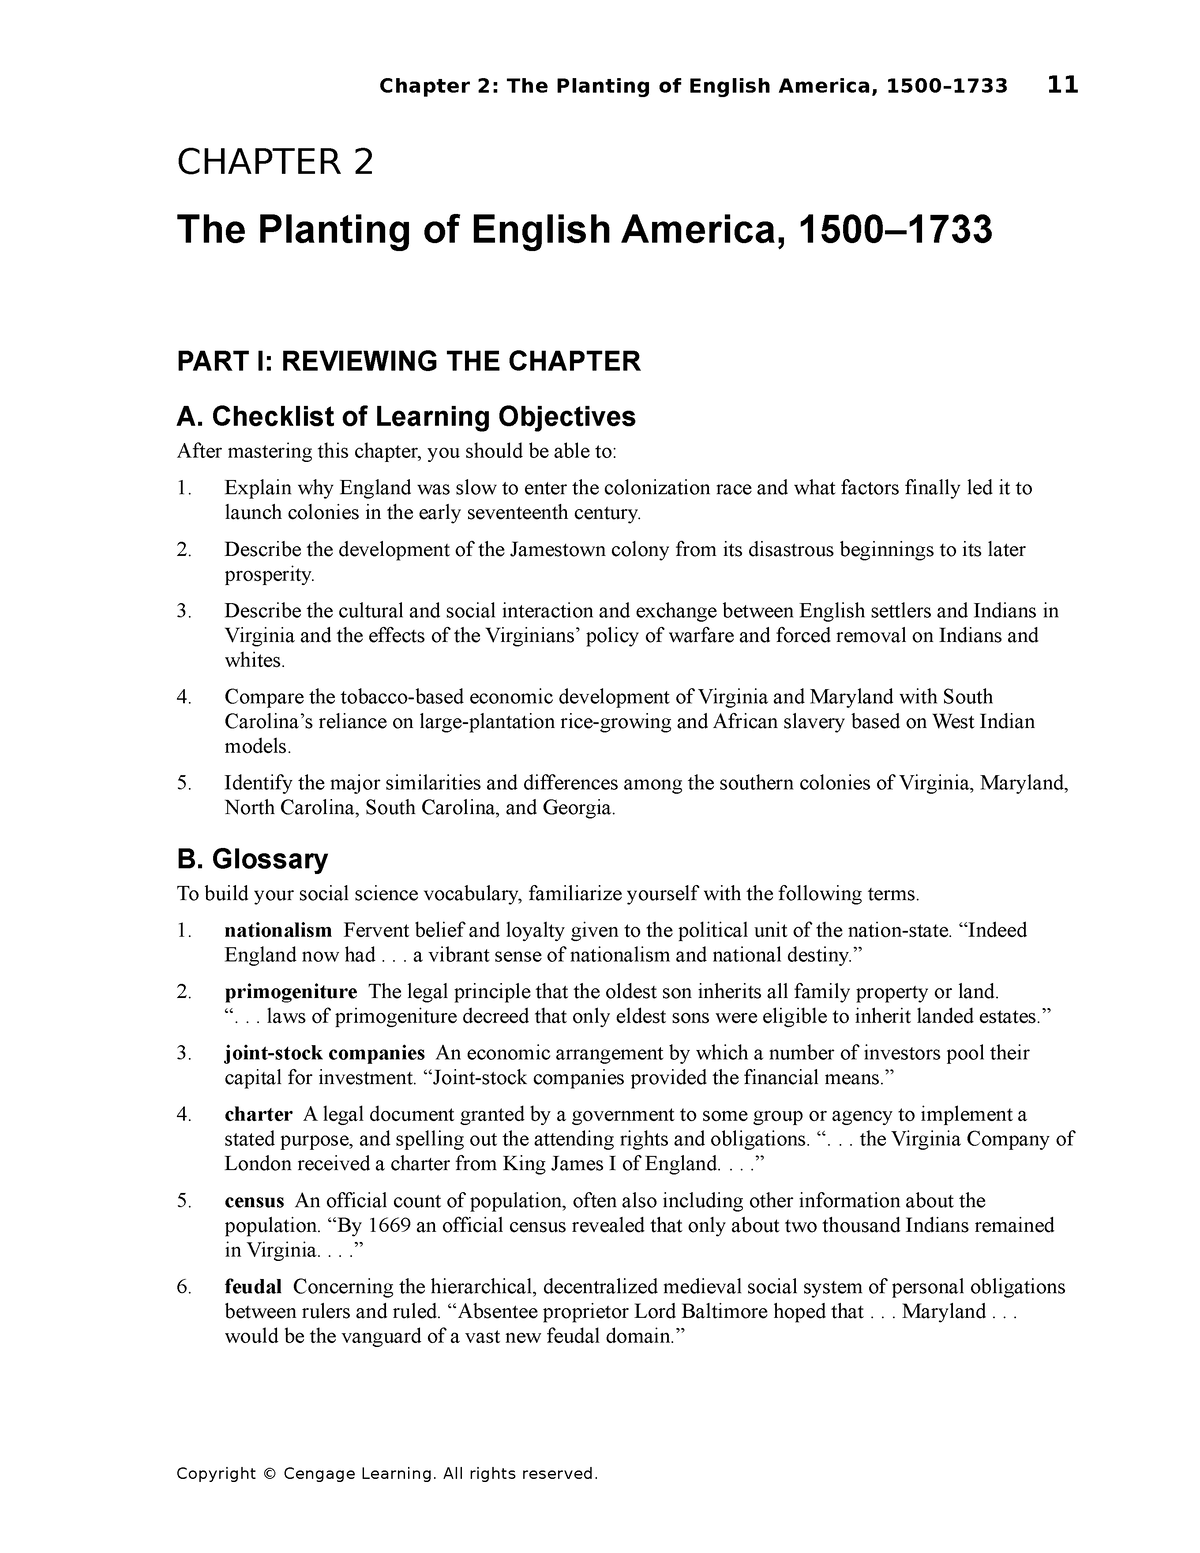 apush-chapter-2-guided-reading-chapter-2-the-planting-of-english-america-1500-part-i